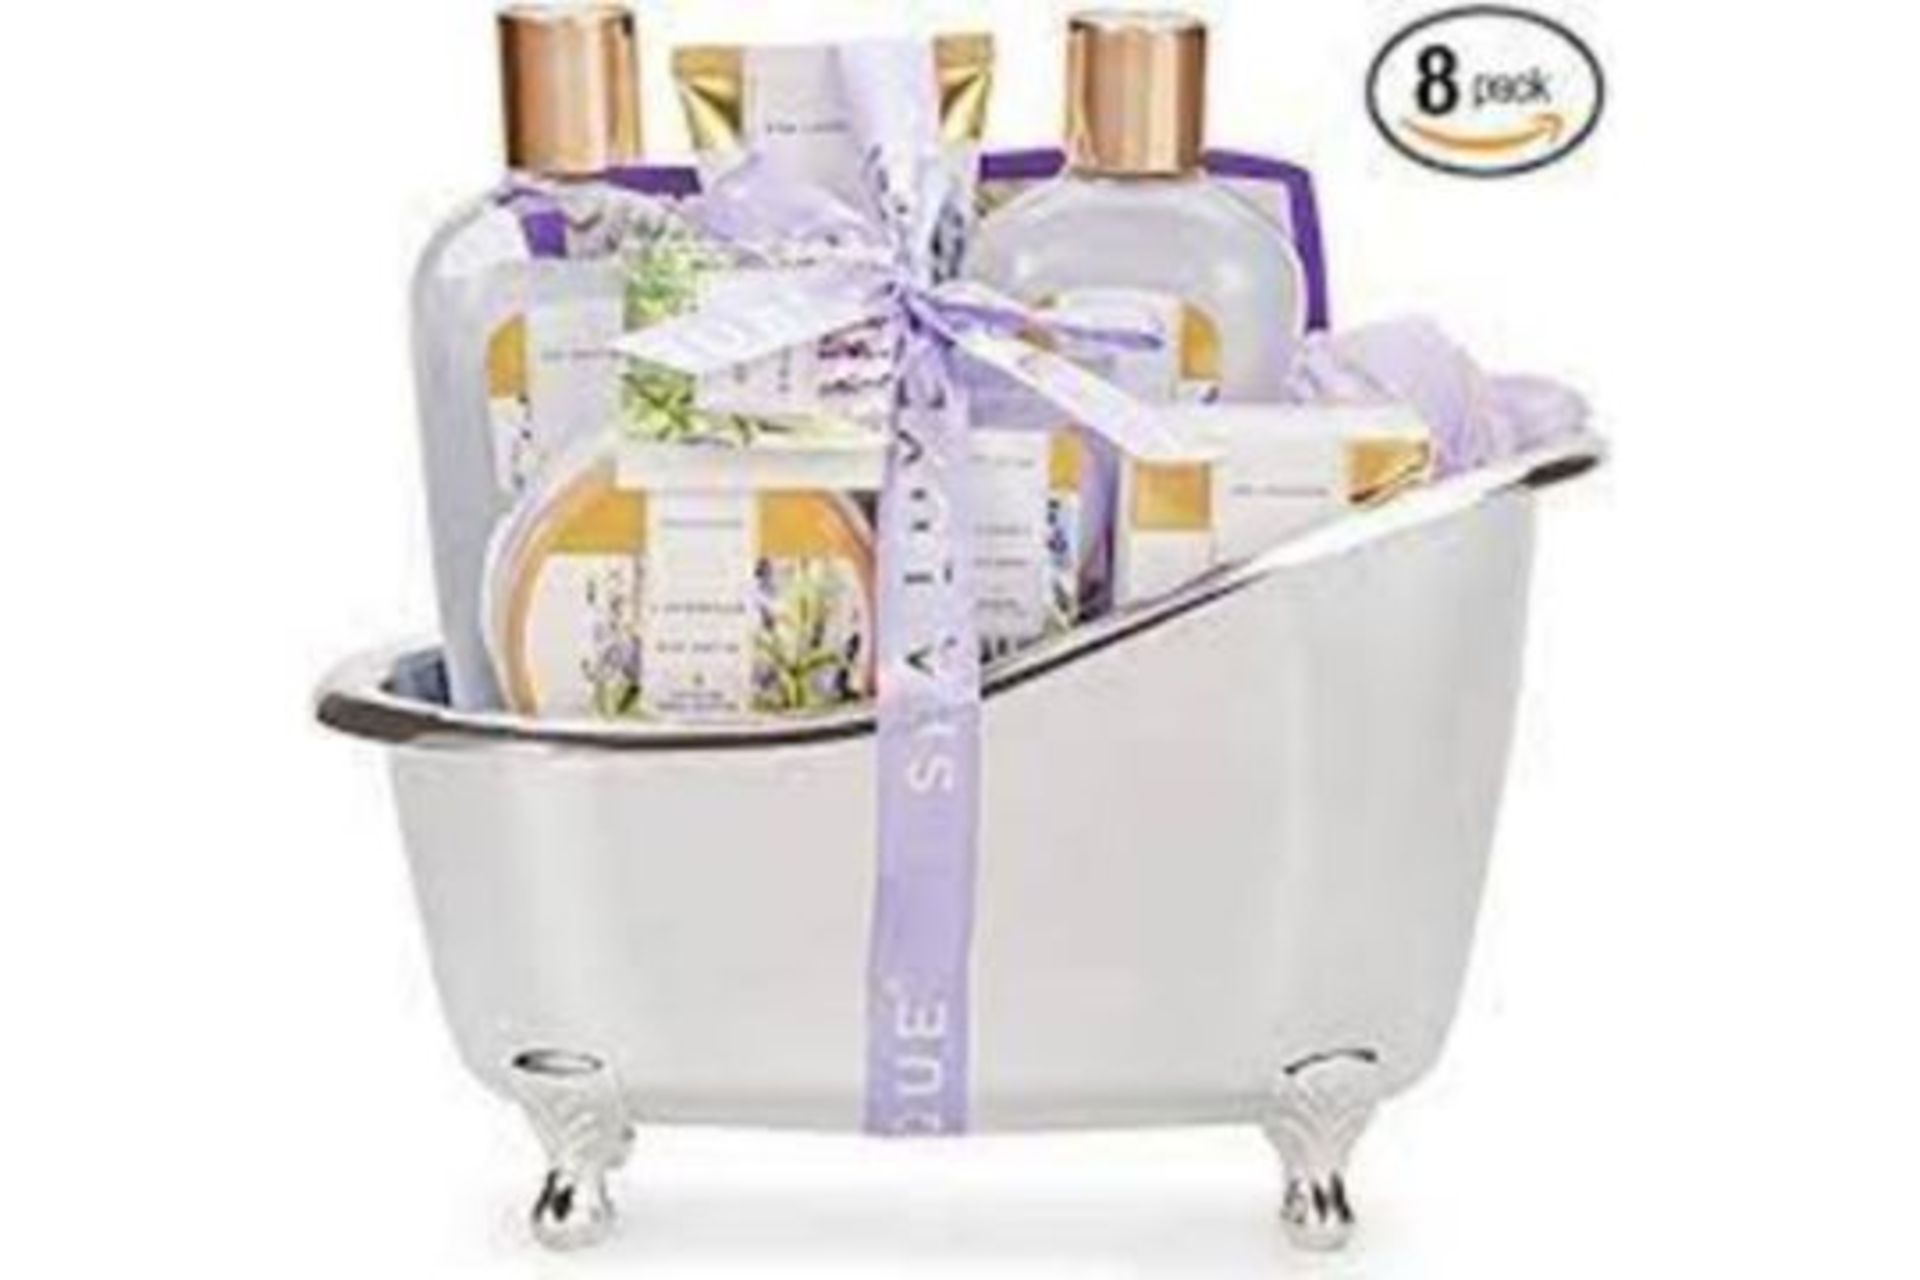 6 x NEW BOXED Spa Luxetique Lavender Spa Bathtub Set. (BEC-5-NEW) Natural Bath Spa Set: Our spa gift